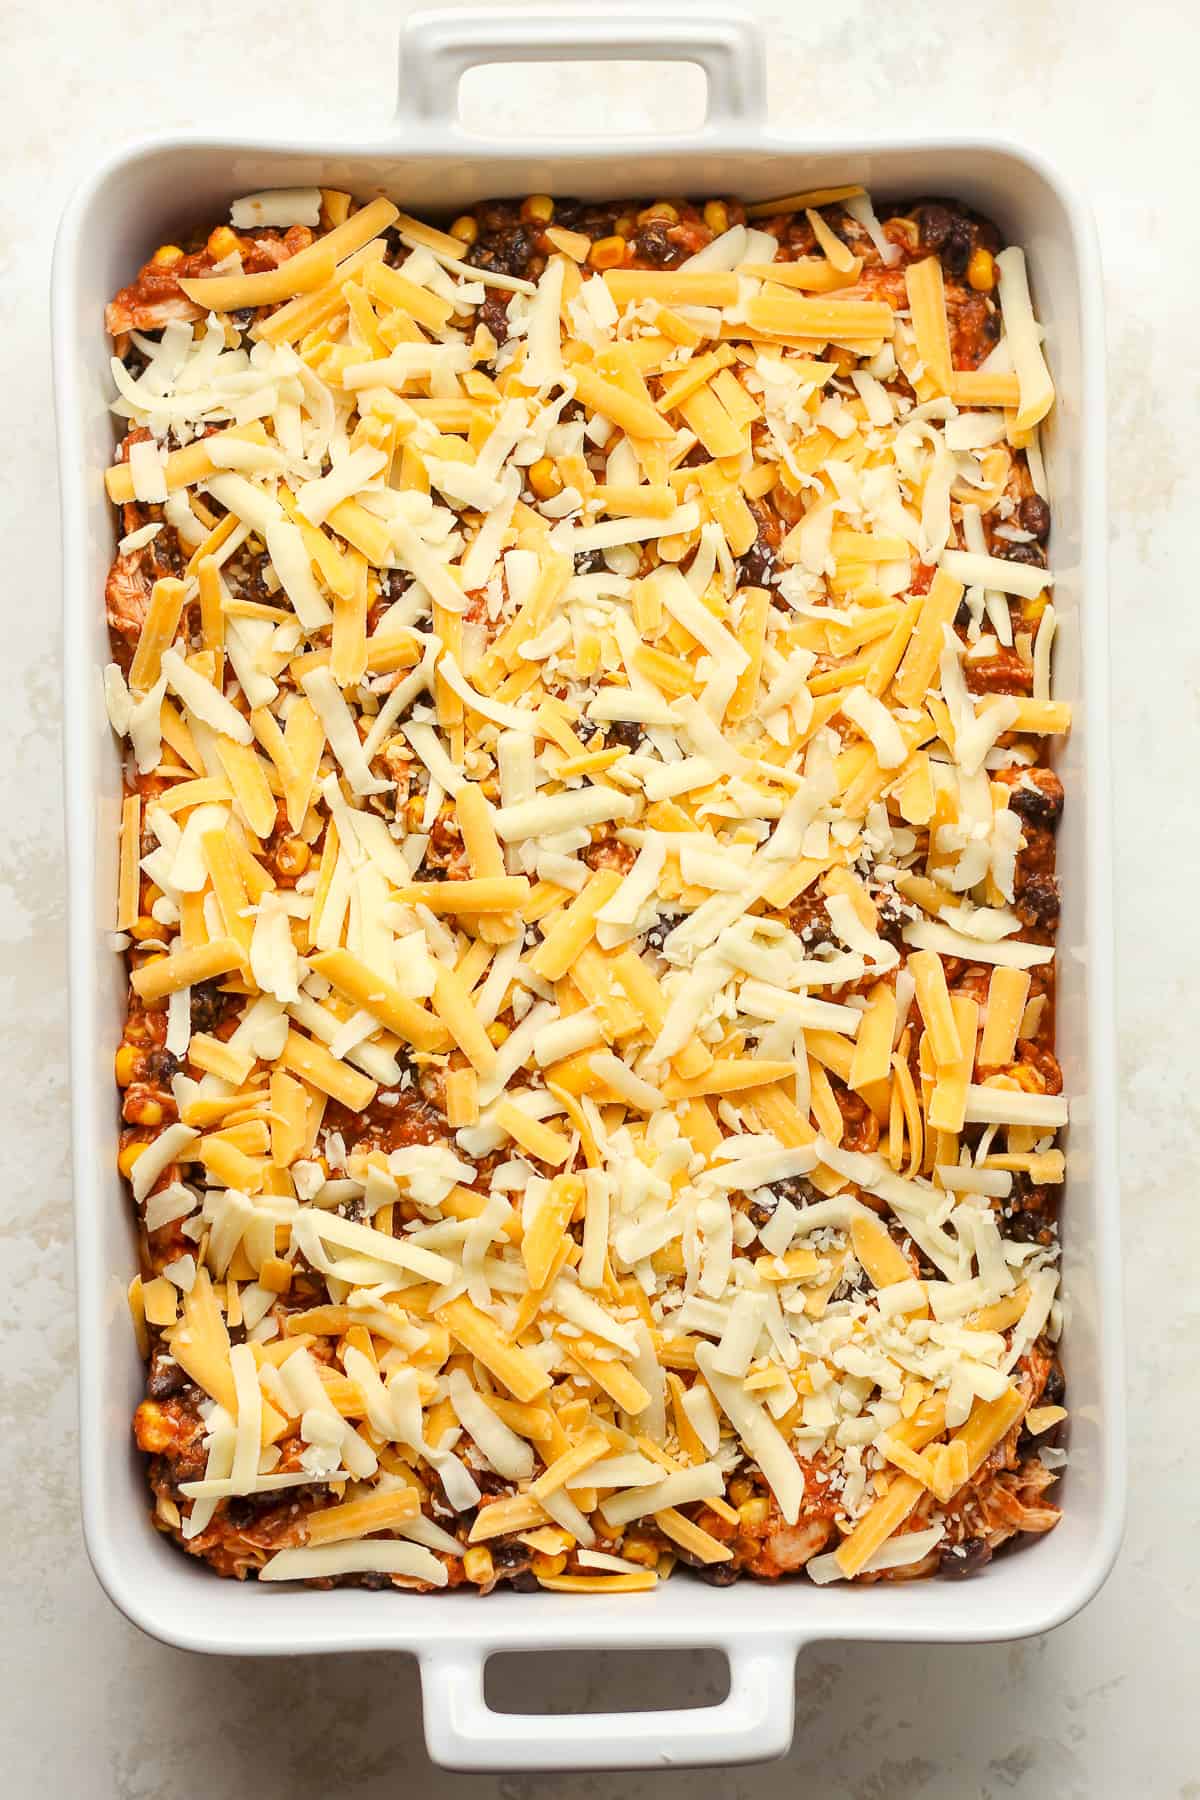 A casserole of the Mexican casserole before baking.